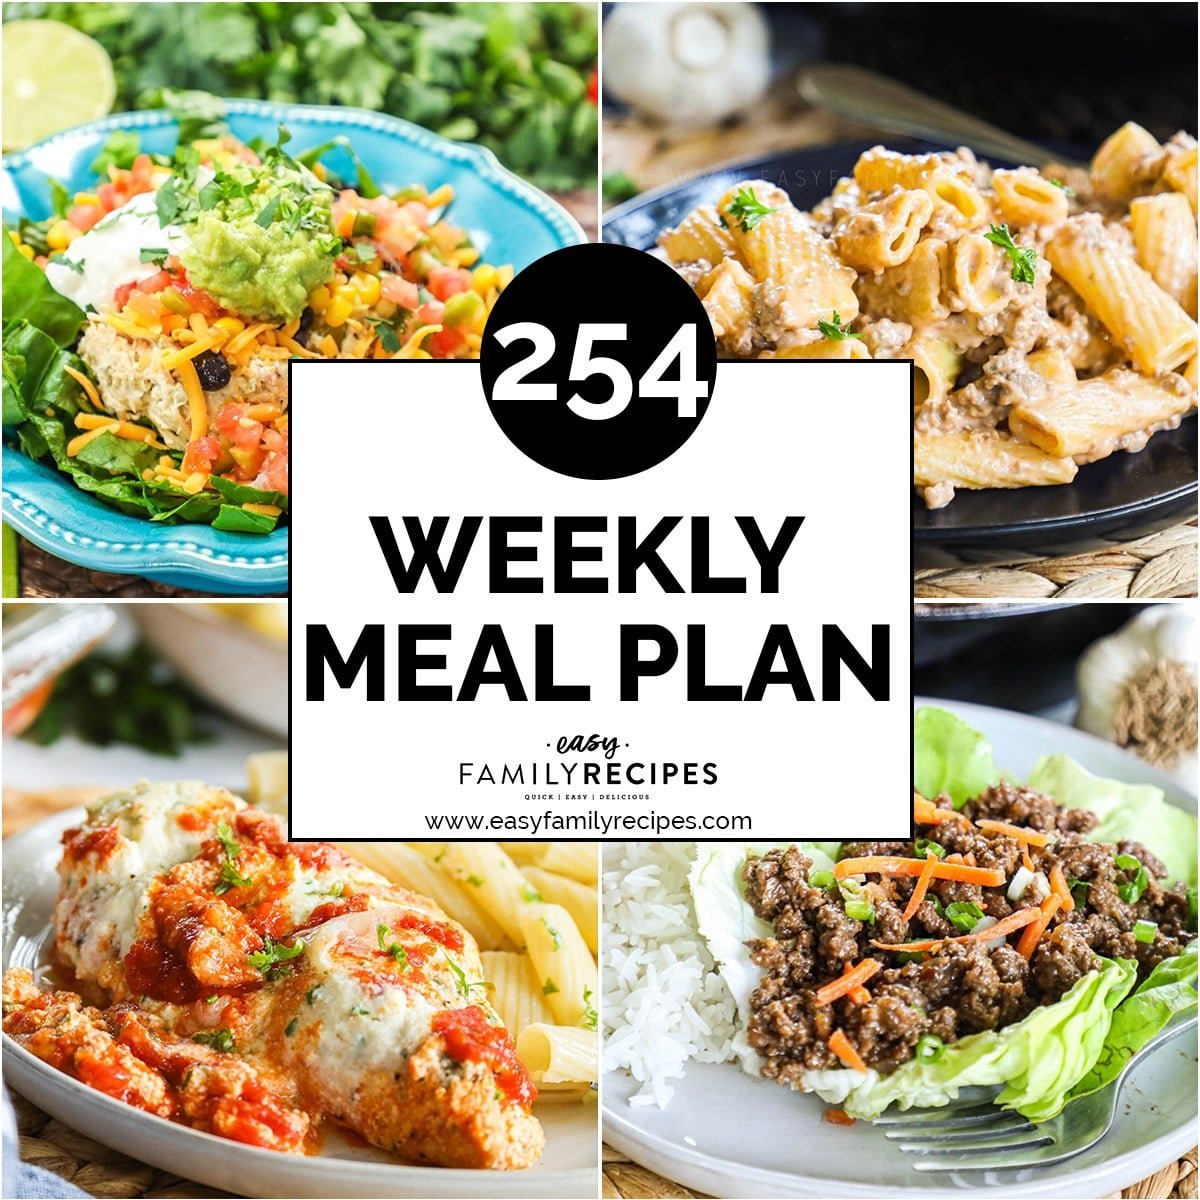 4 plated dinners for free meal plan #254